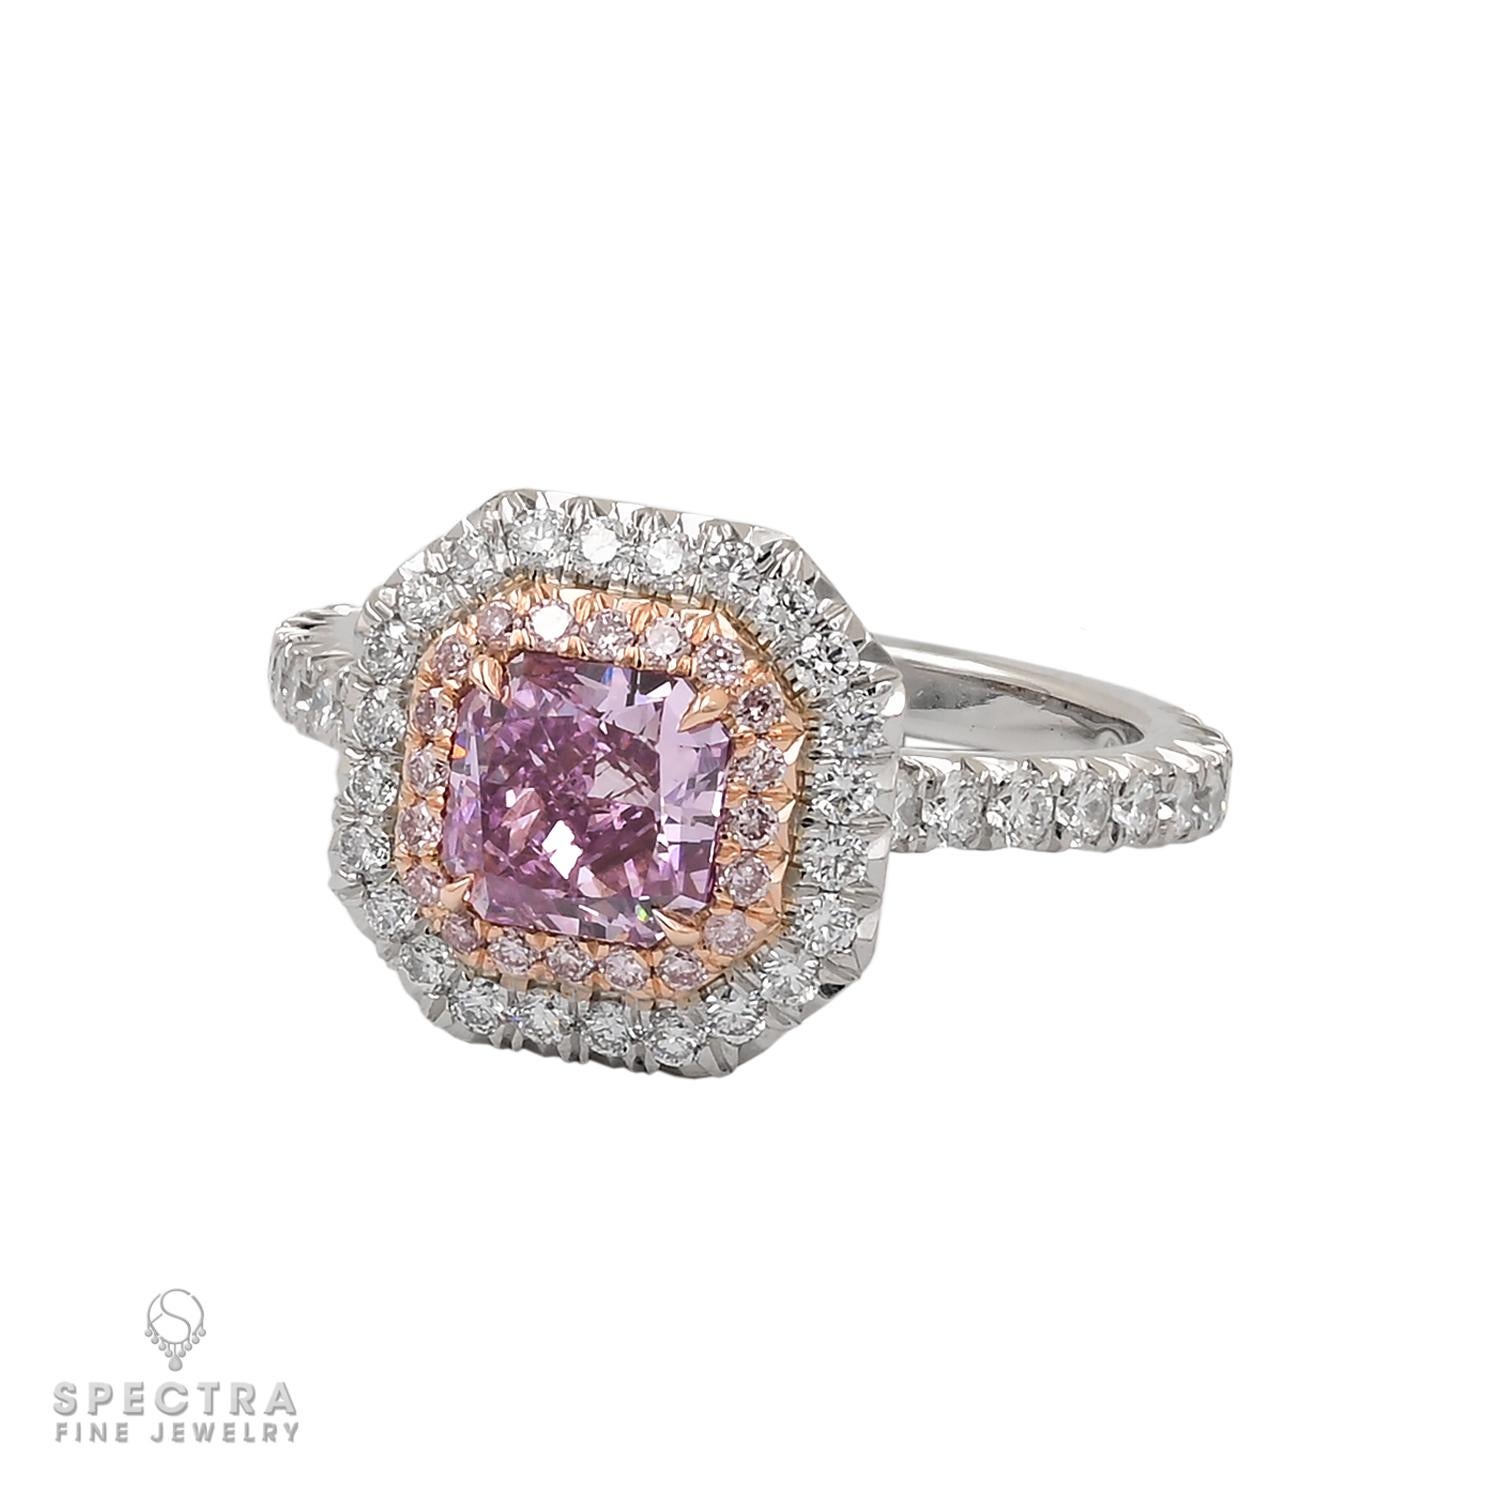 Behold the epitome of timeless elegance and refined romance in this exquisite engagement ring. At its heart, a dazzling 1.10 carat Radiant-cut Fancy Intense Pink Purple Diamond, with an undeniable allure that captures the essence of love itself.